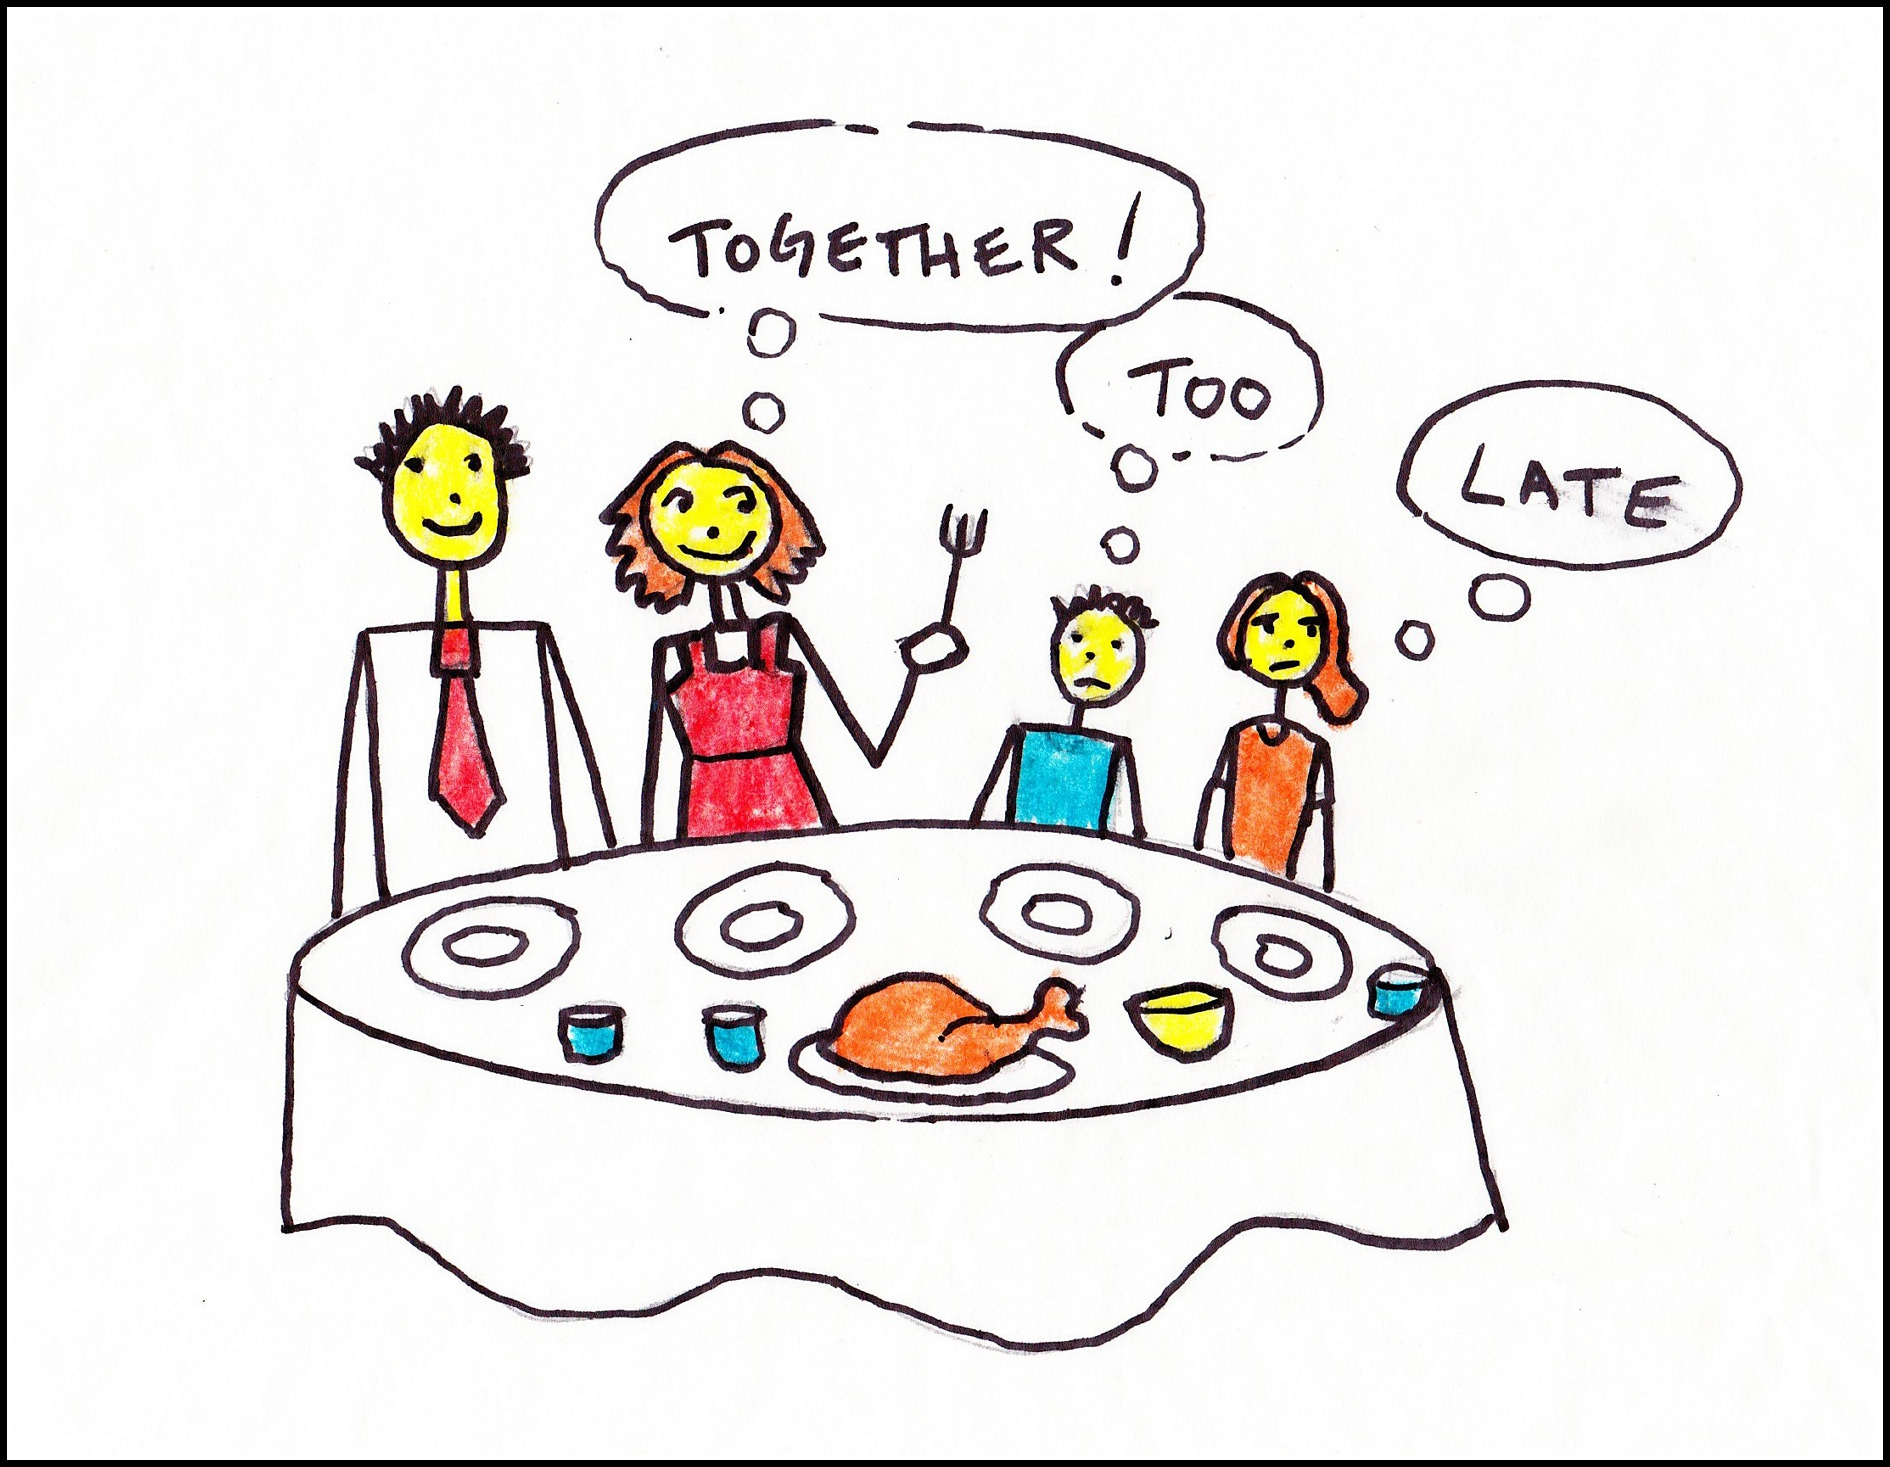 Family Dinner Time drawing free image download